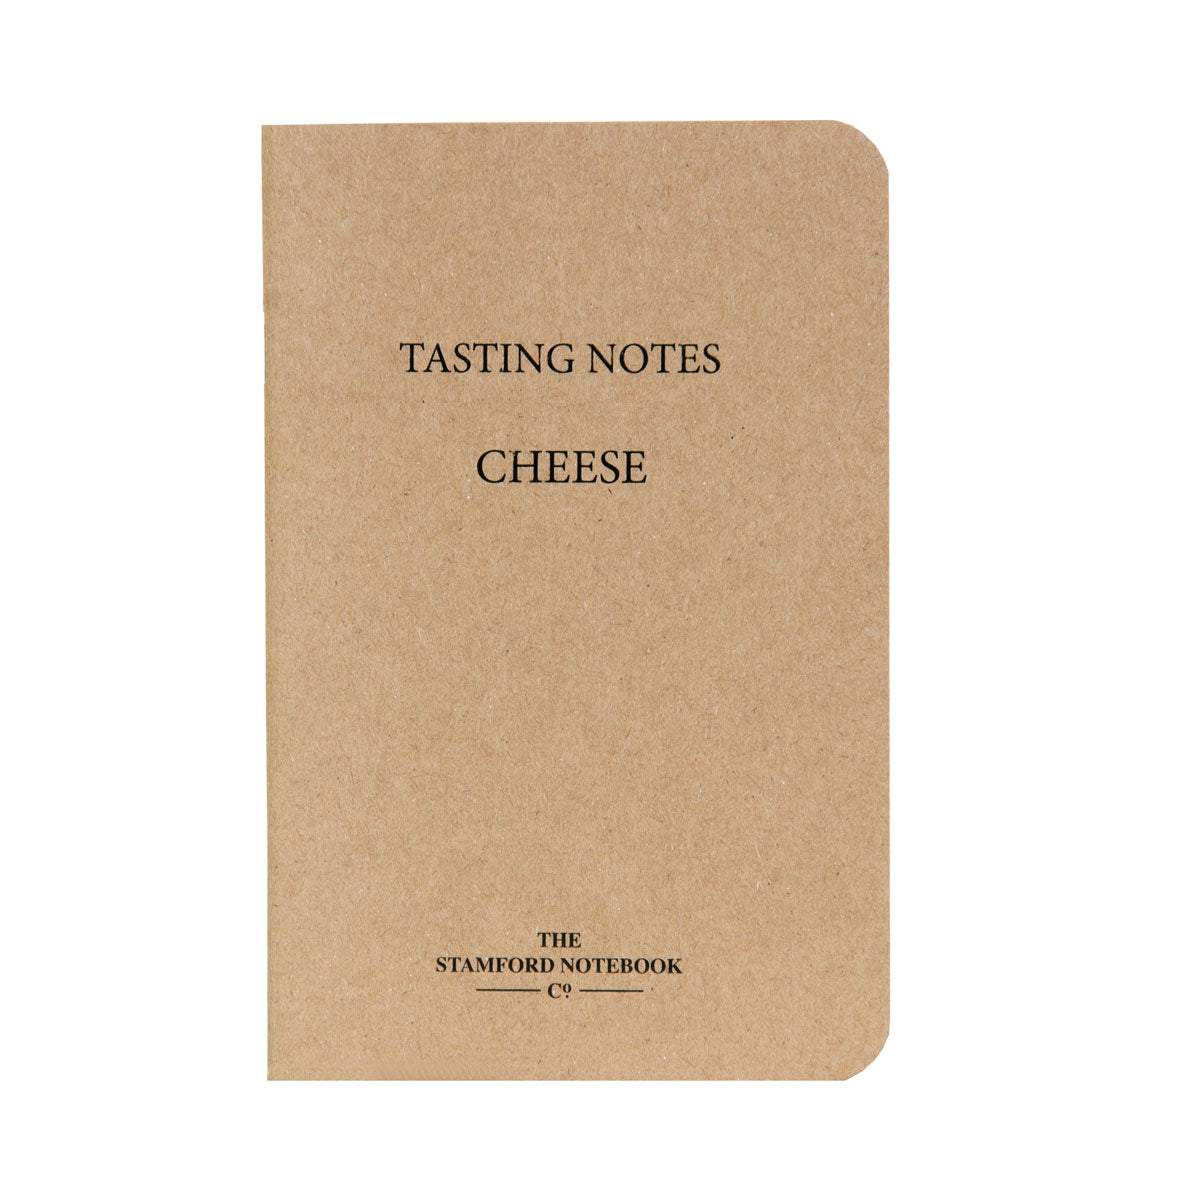 Tasting Notes - Cheese